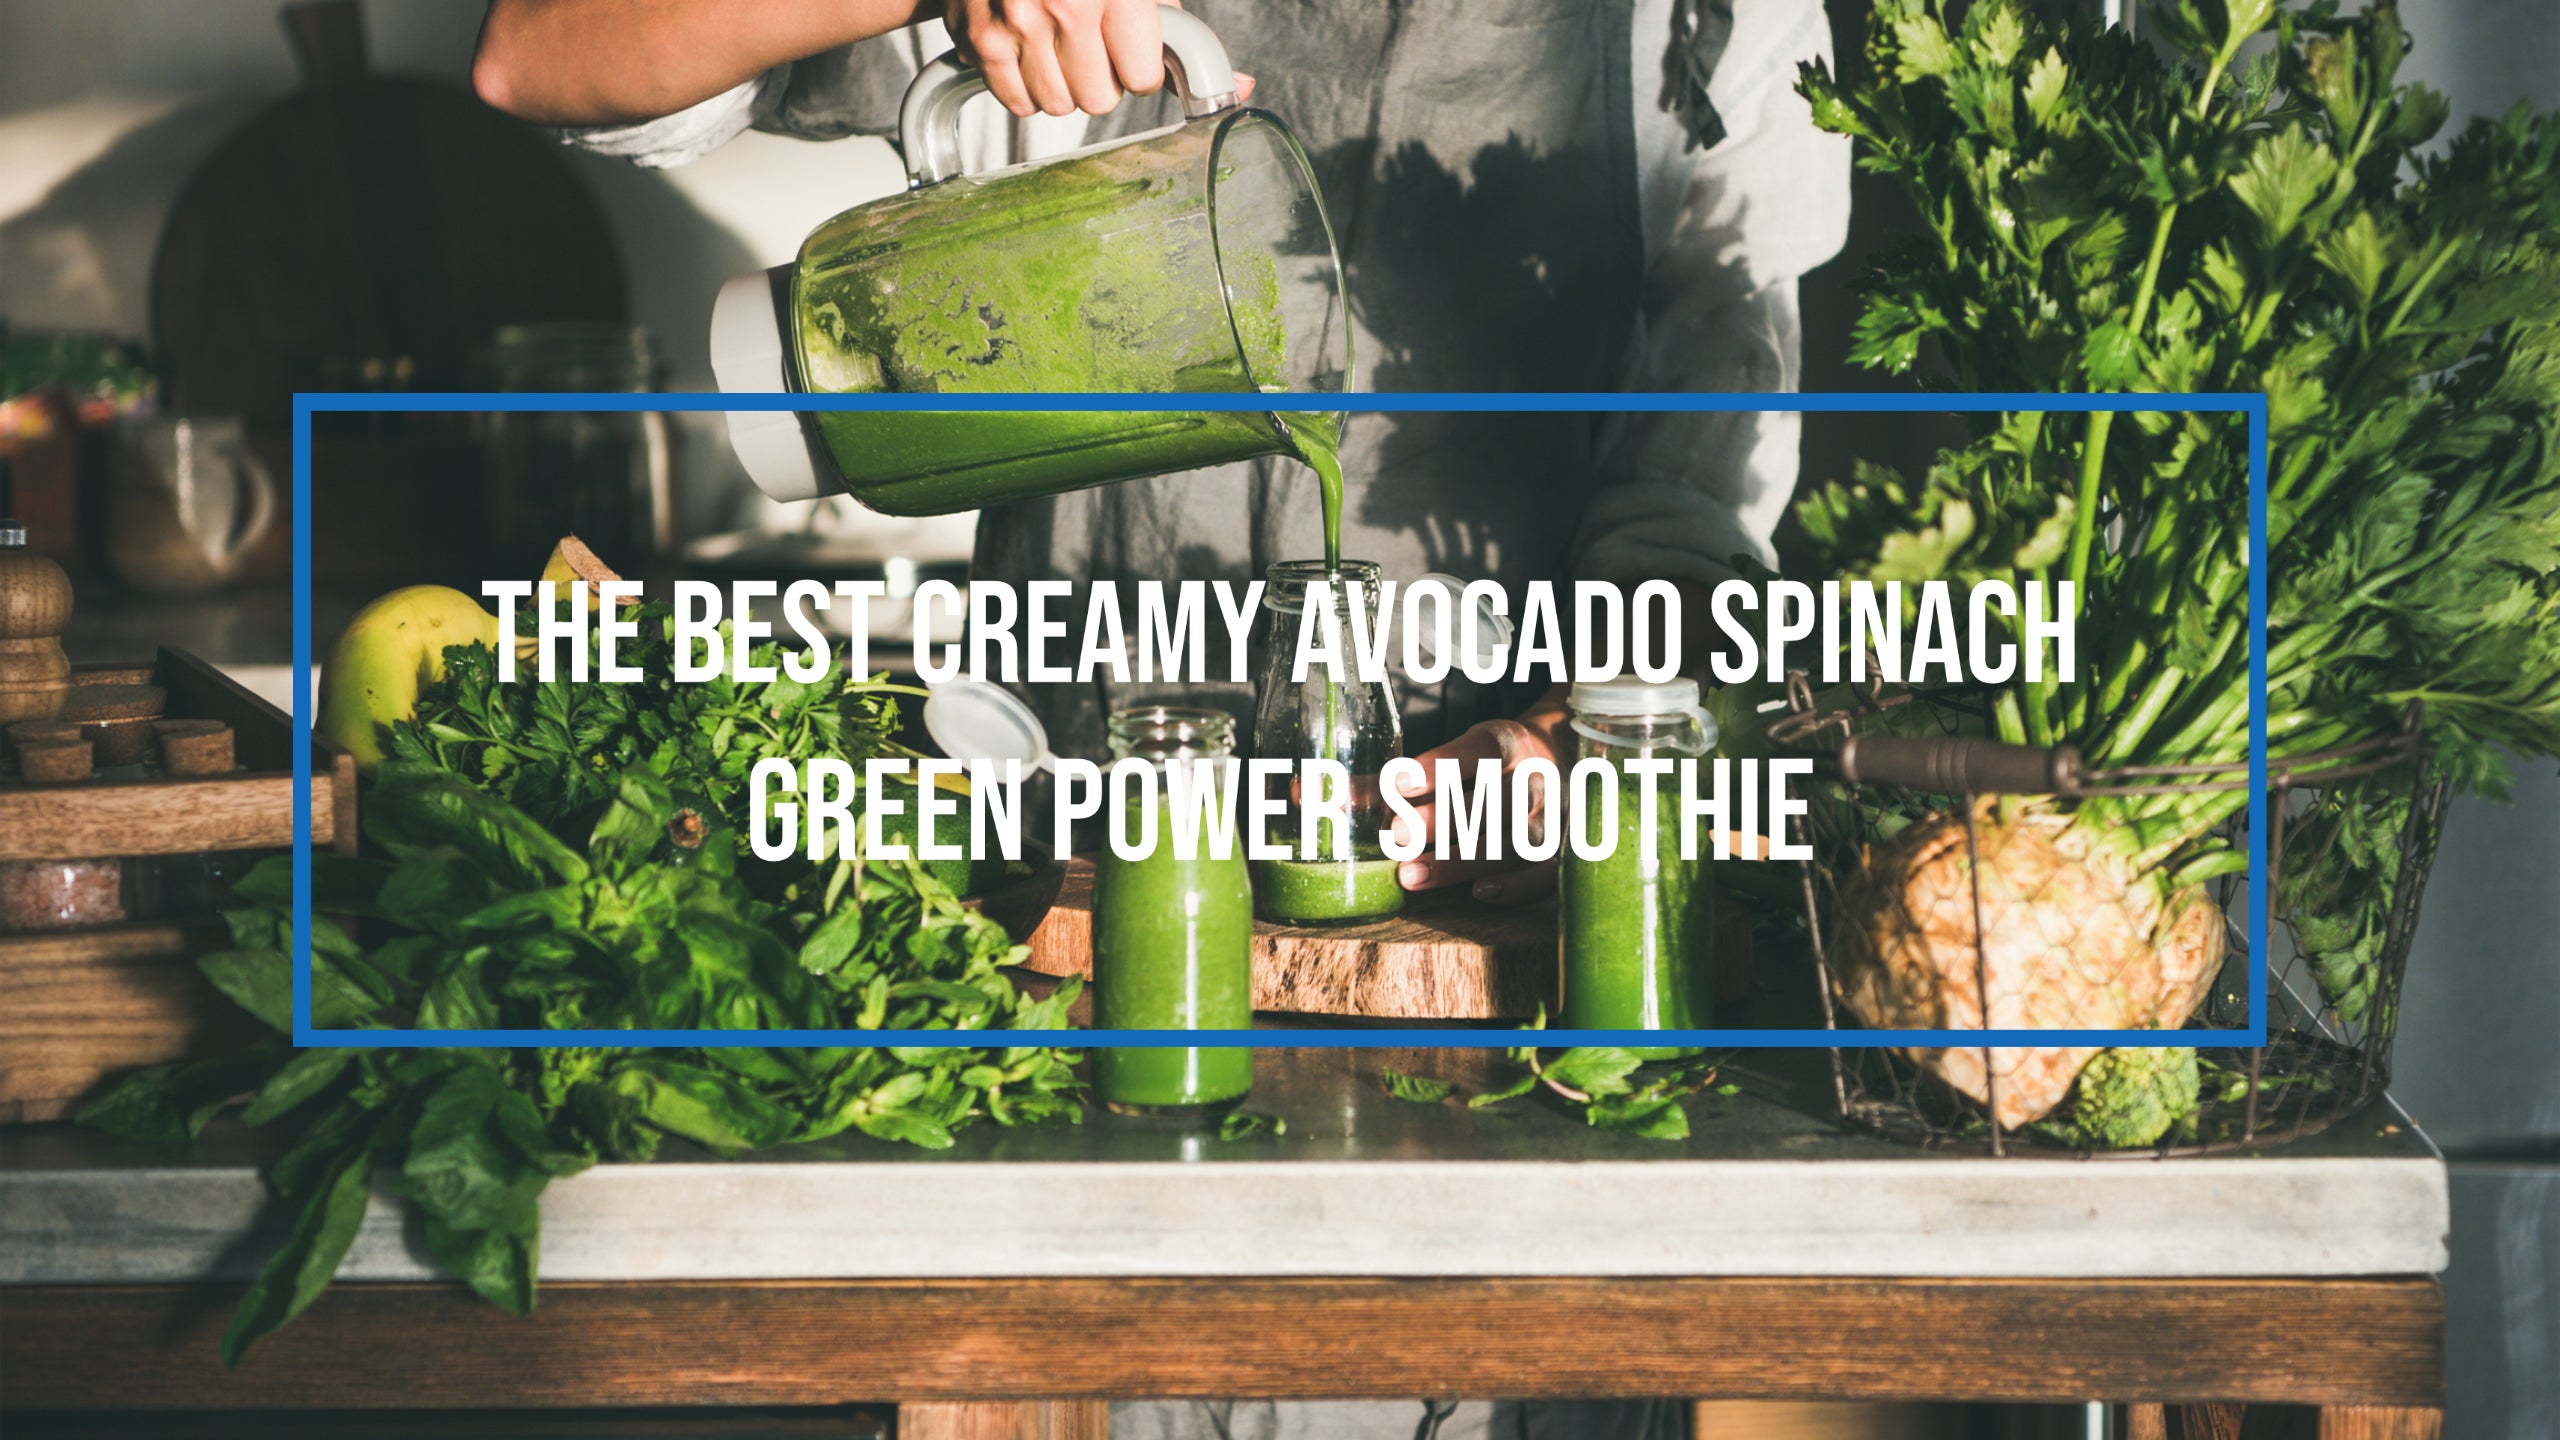 Best Creamy Avocado Spinach Green Power Smoothie. Green smoothie being made.